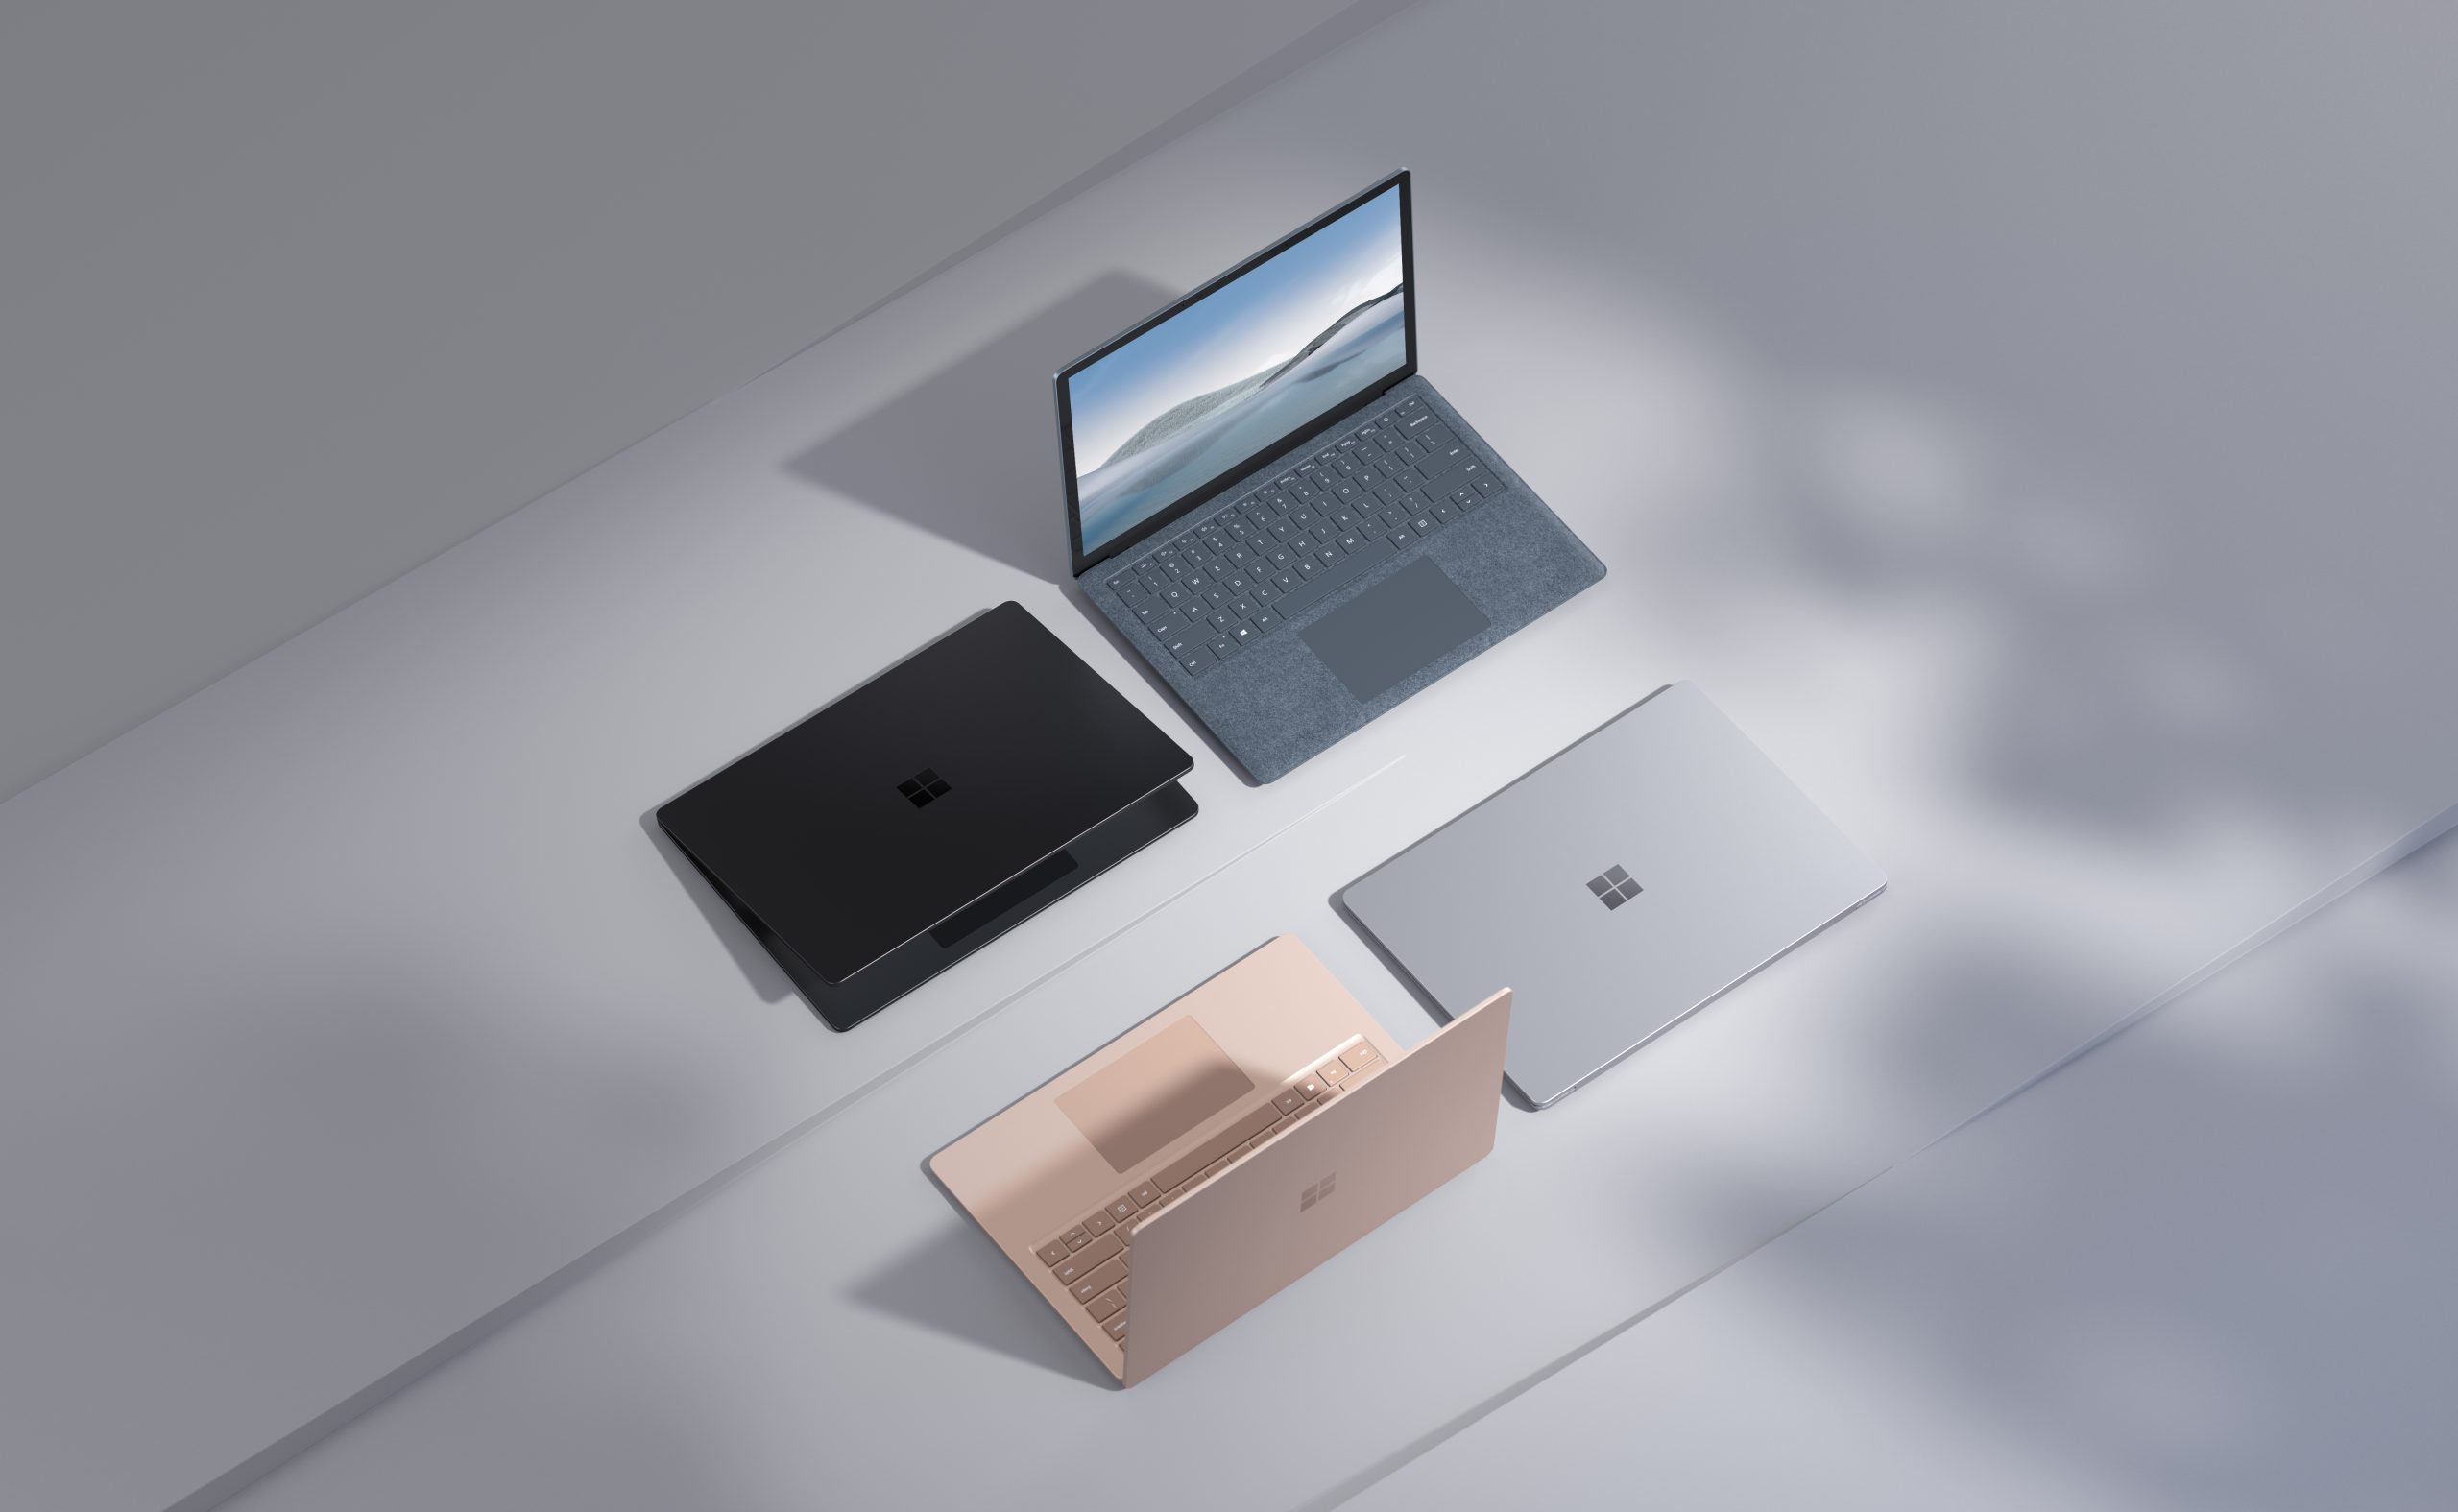 Introducing Surface Laptop 4 and new accessories for enhanced